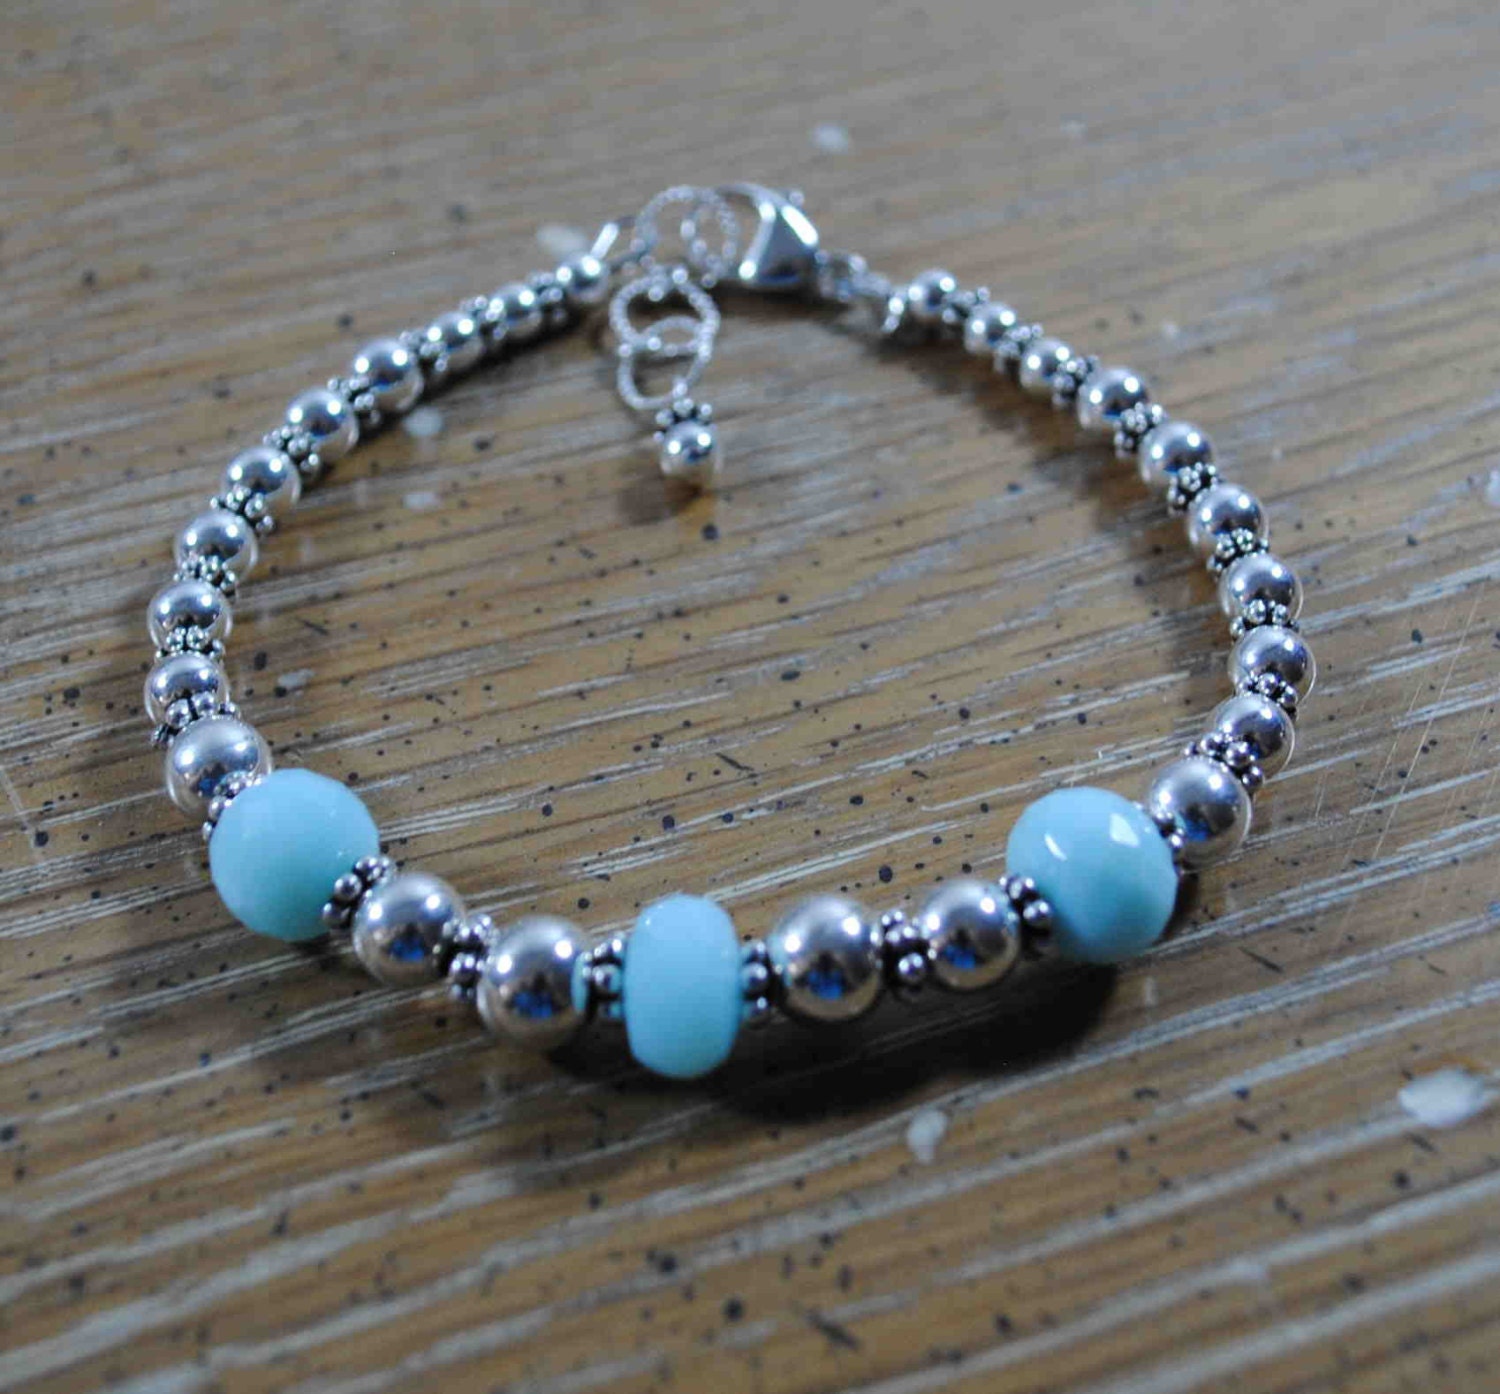 Faceted Peruvian Blue Opal and Sterling Silver Bracelet - BridgetsCollection